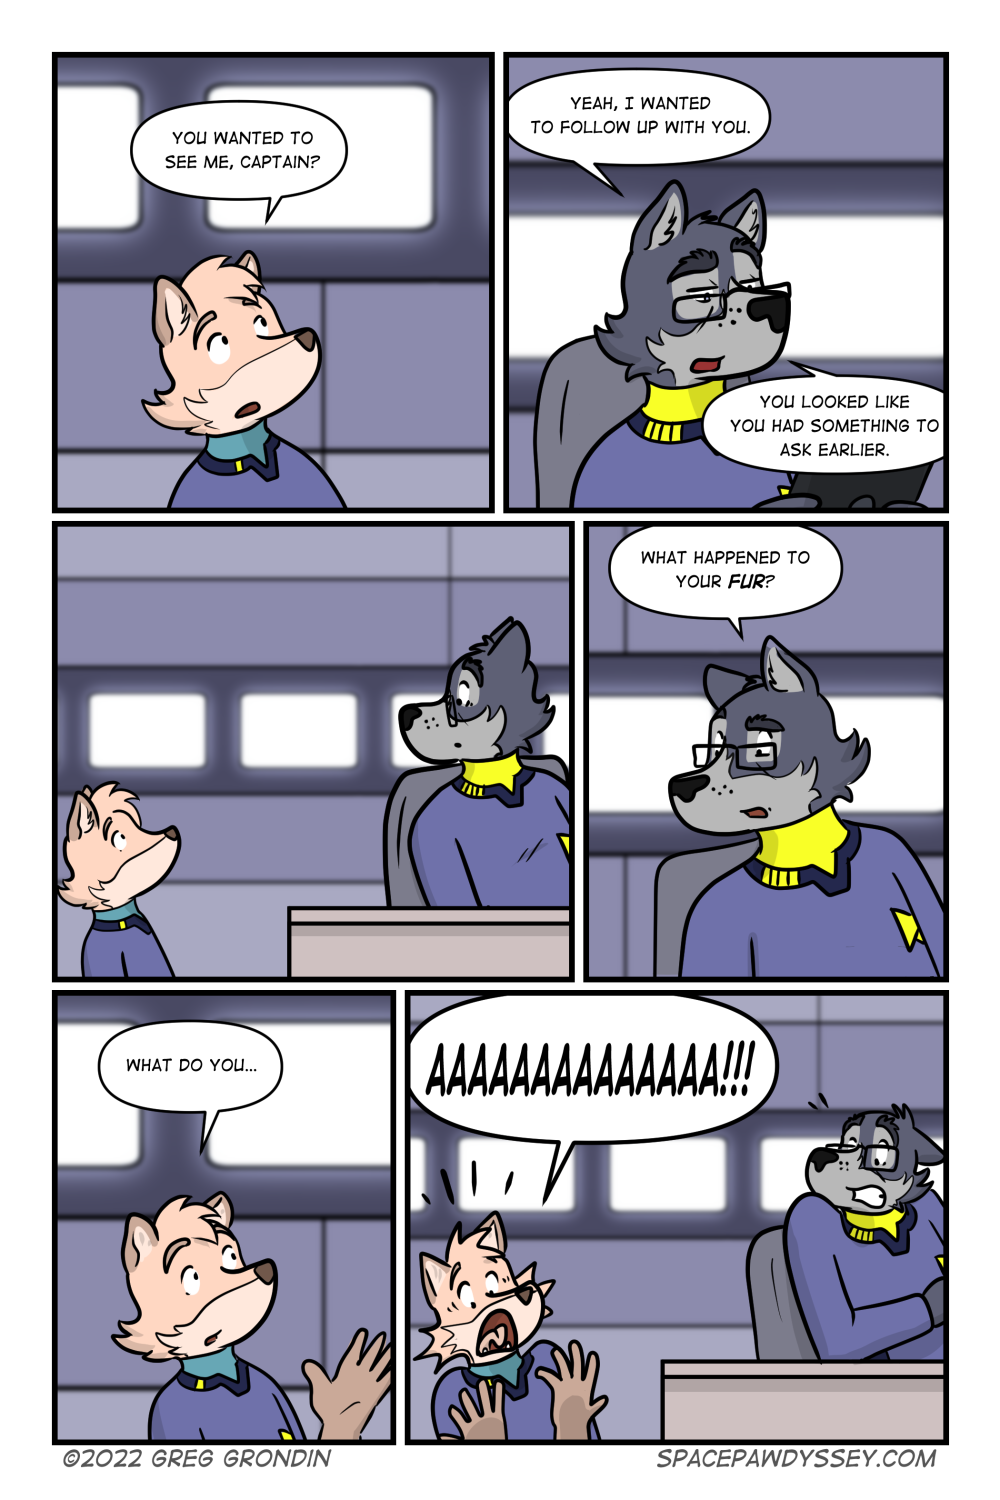 Space Pawdyssey #594